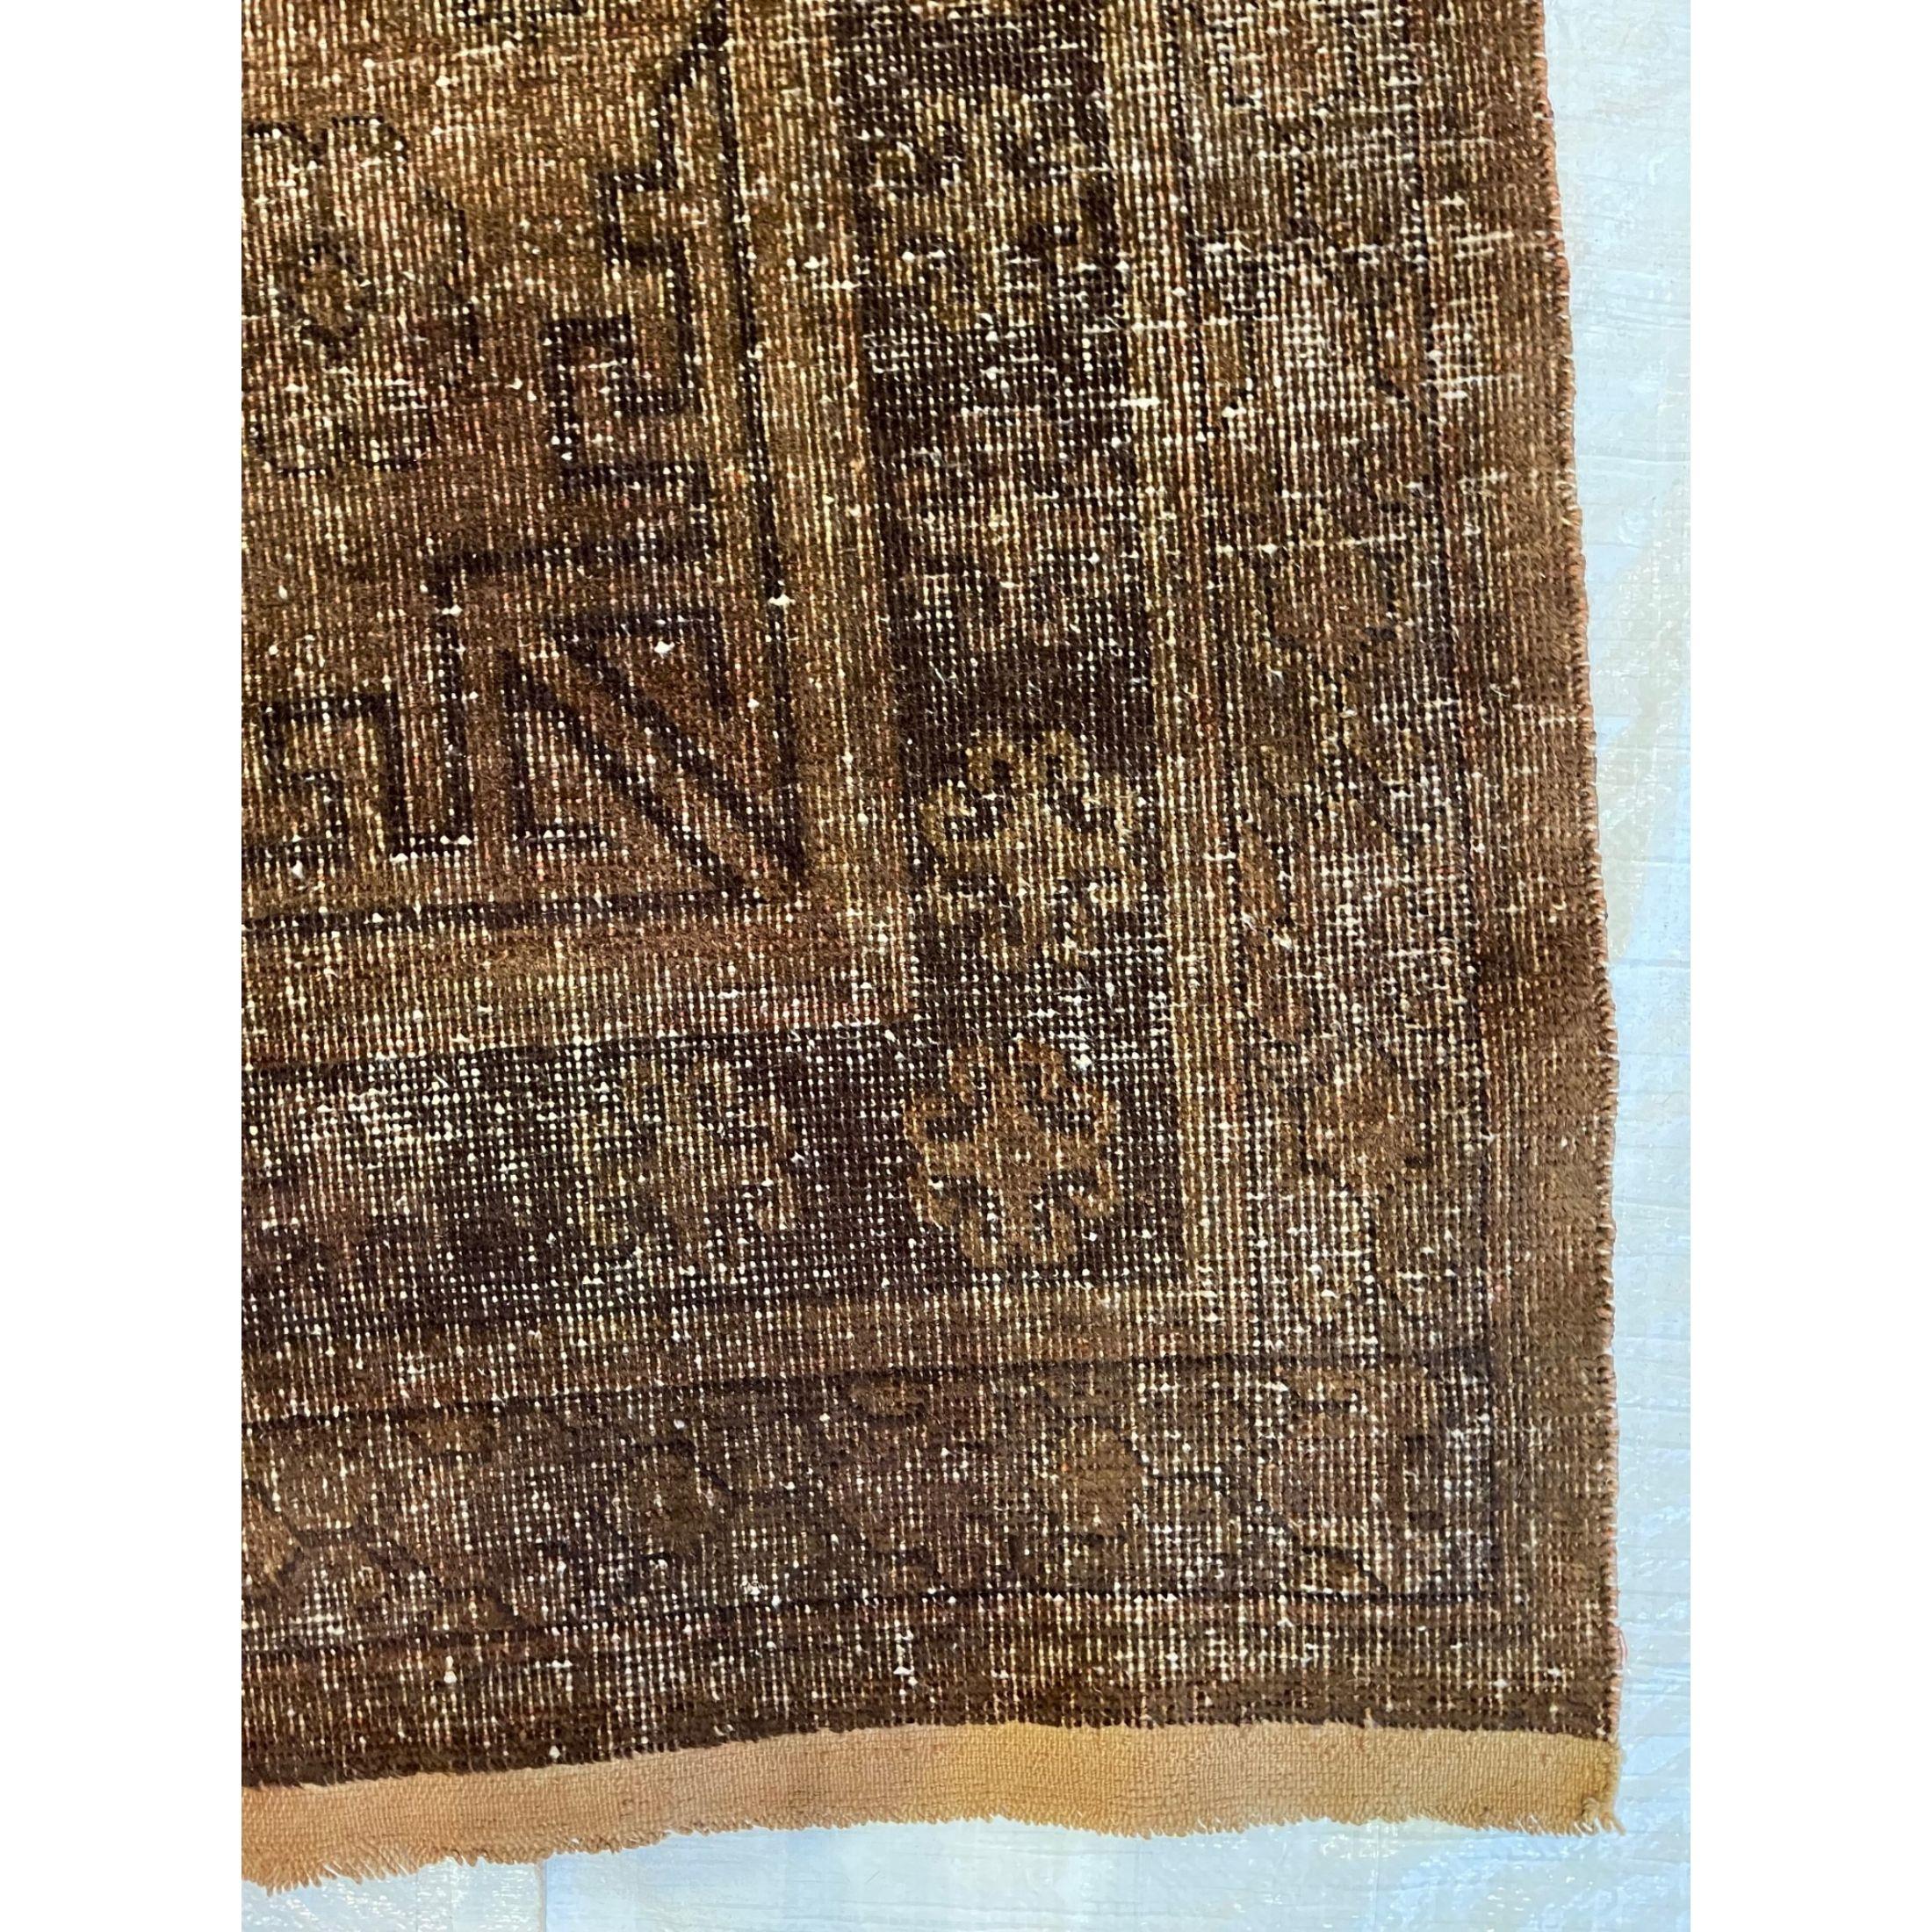 Other Late-19th Century Muted Faded Khotan Samarkand Rug For Sale